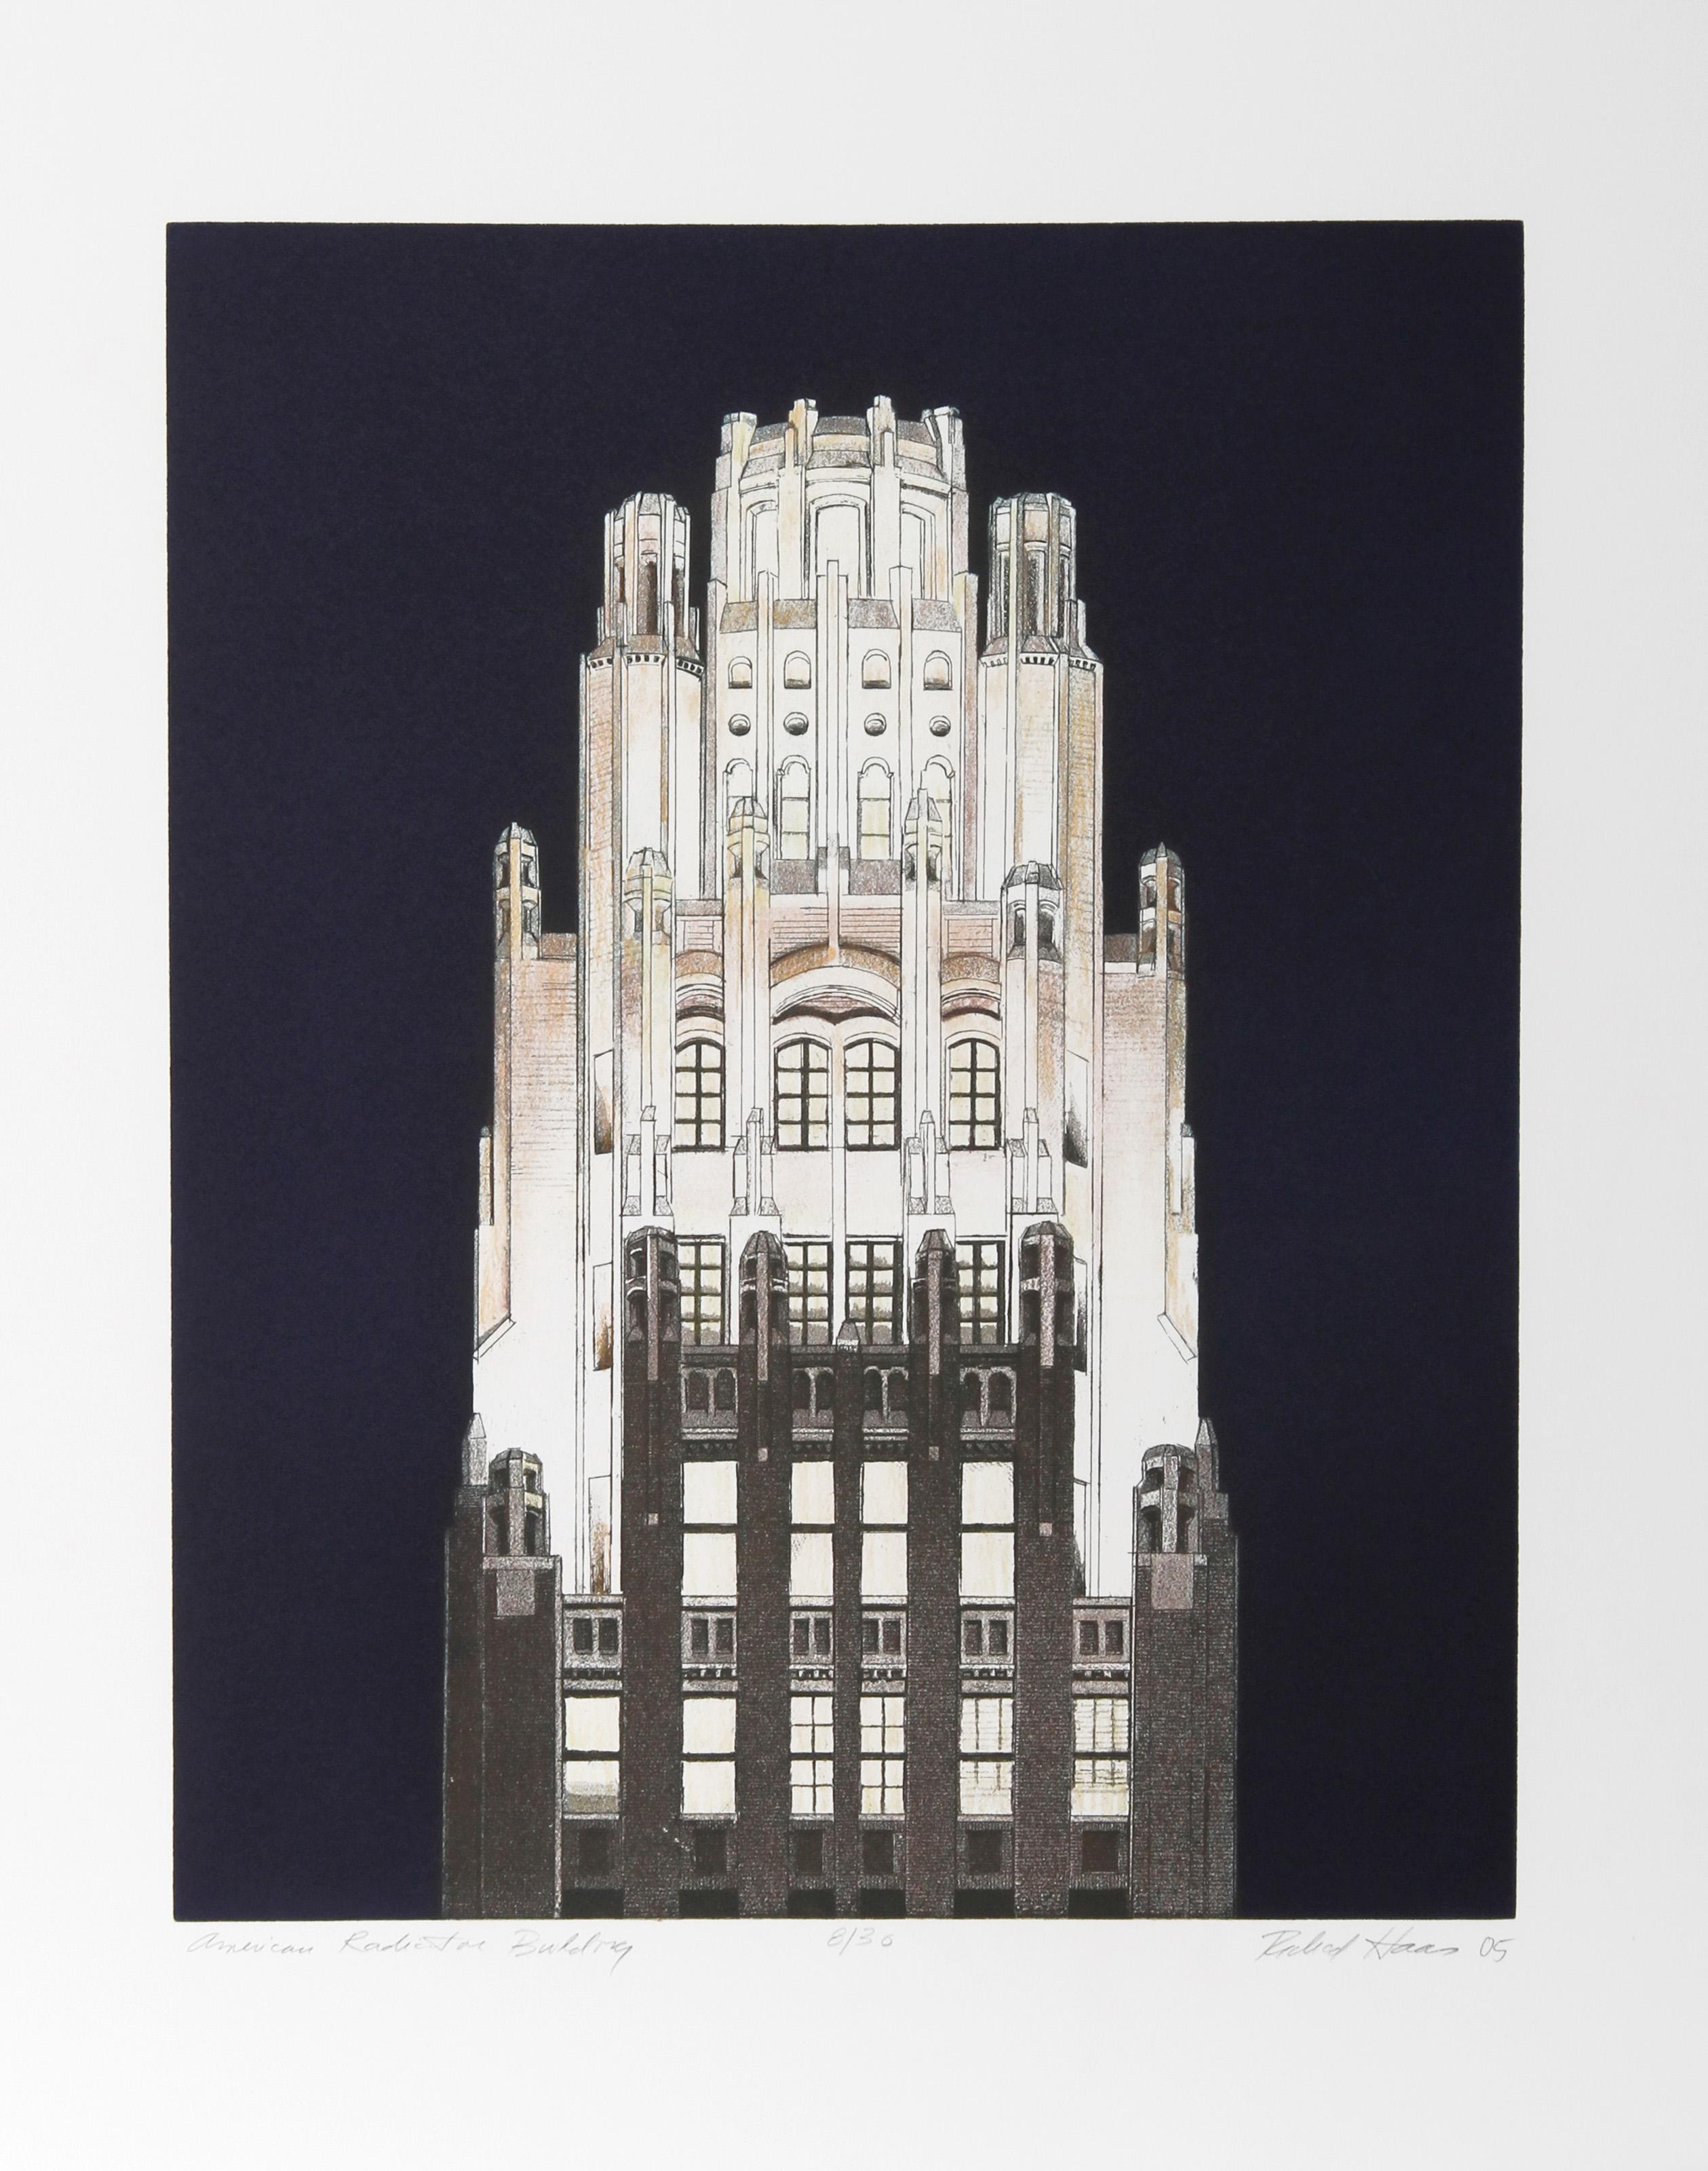 Richard Haas, American (1936 - ) -  American Radiator Building (Blue). Year: 2005, Medium: Etching, signed and numbered in pencil, Edition: 30, Image Size: 20 x 16 inches, Size: 26  x 21 in. (66.04  x 53.34 cm), Description: An iconic Art Deco